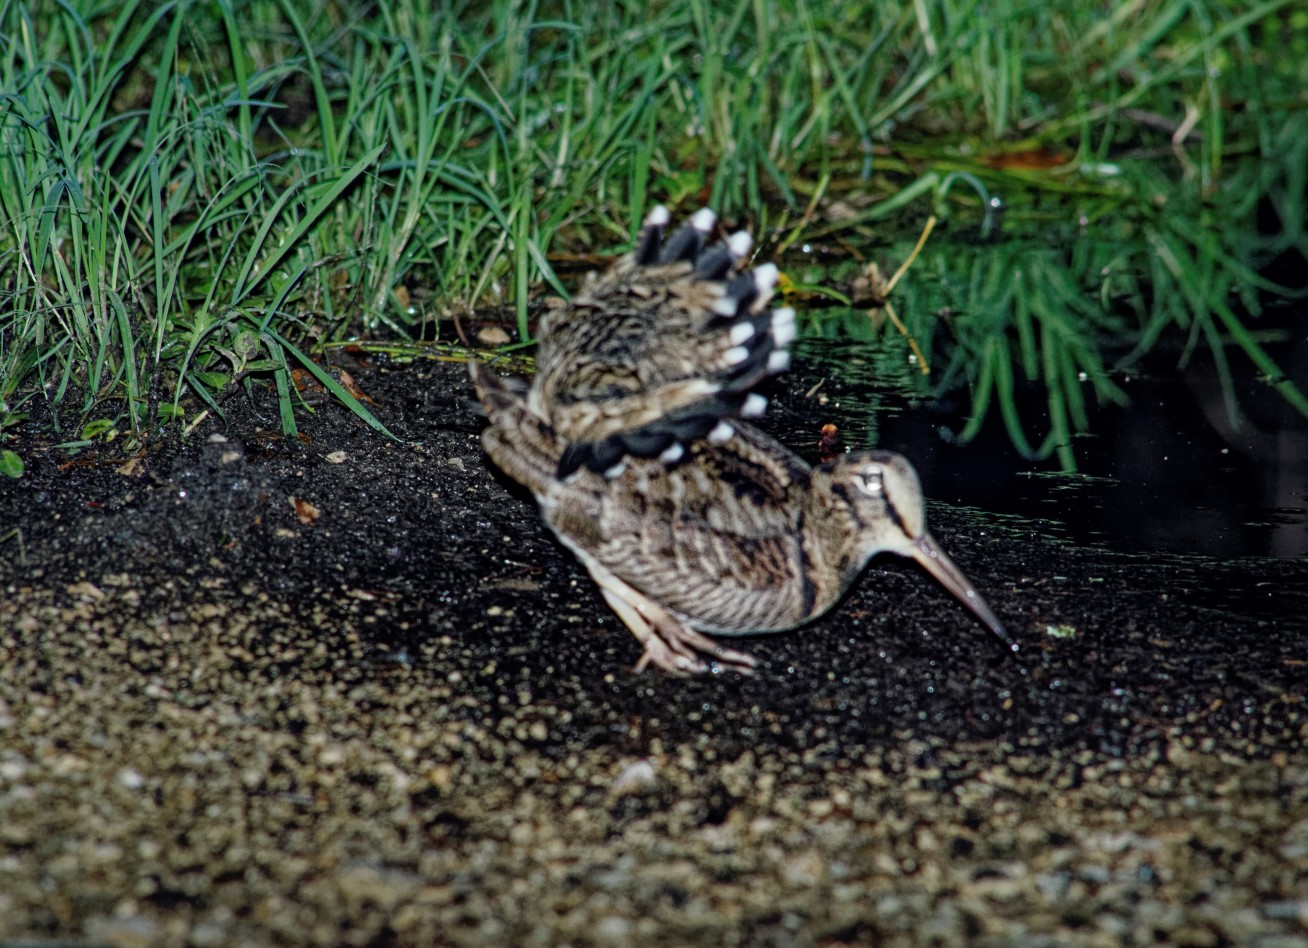 A small brown bird on the ground in the dark, lifting its tail to show bright white feather tips